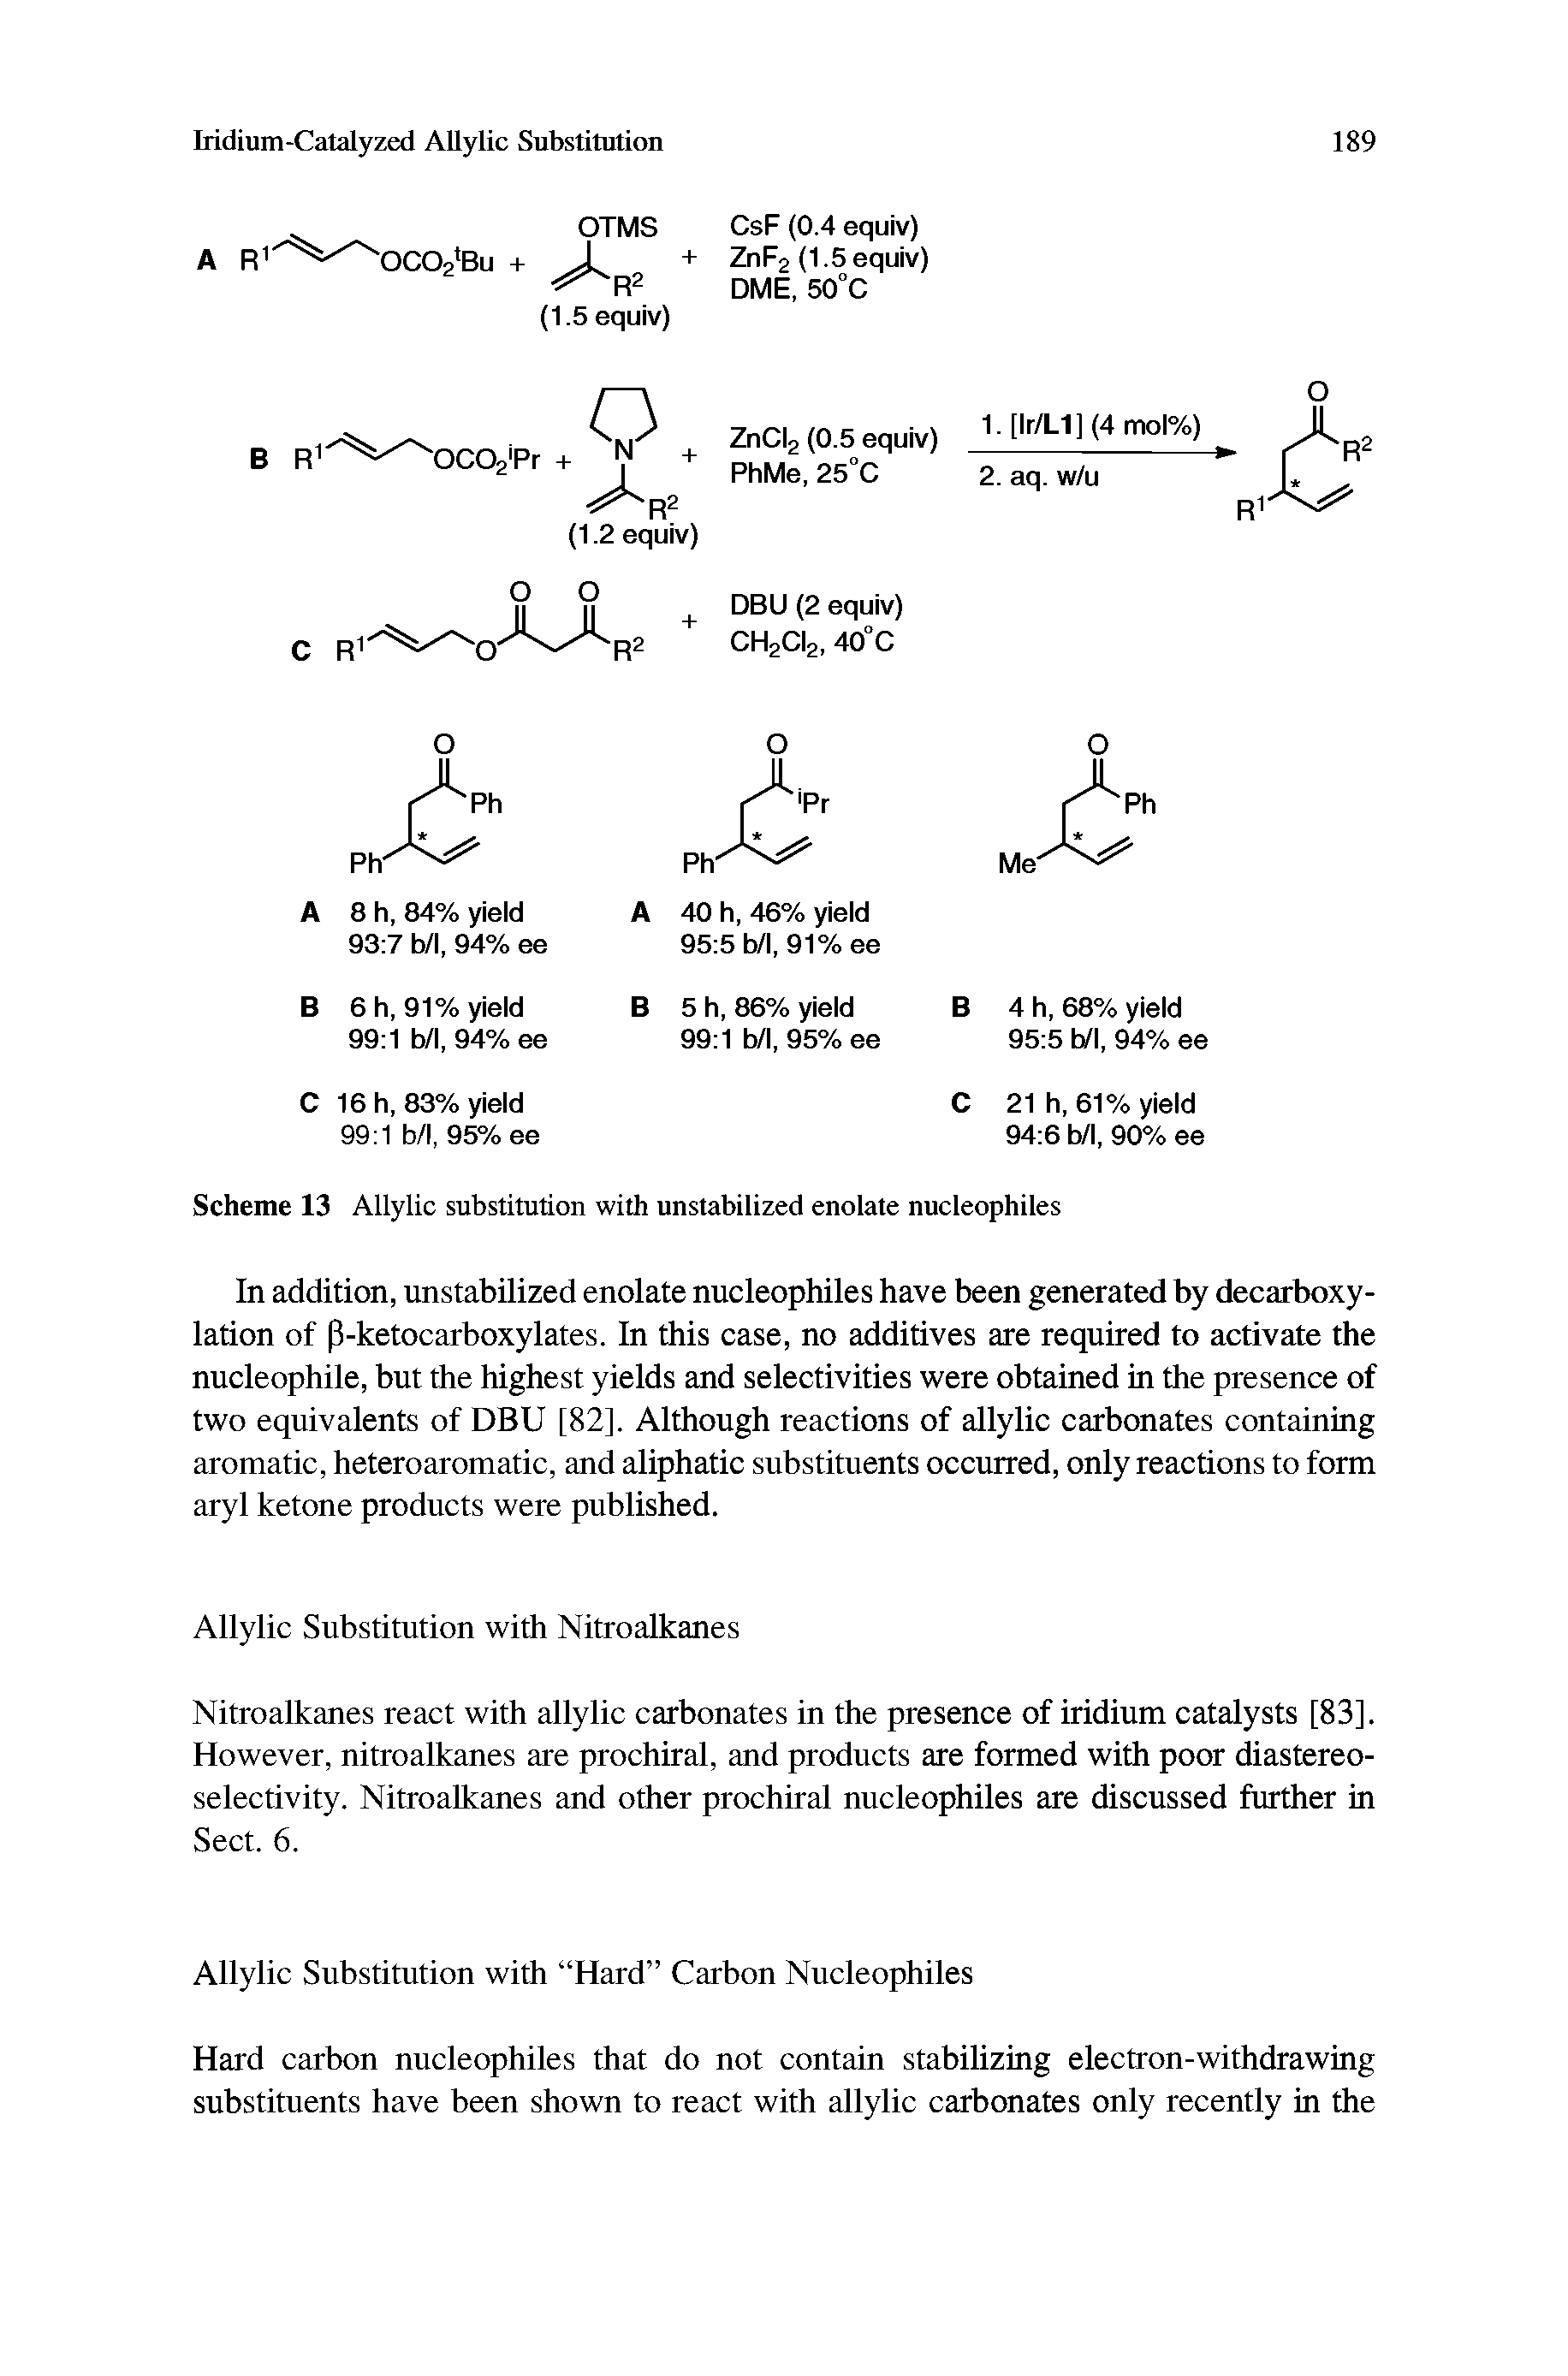 Scheme 13 Allylic substitution with unstabilized enolate nucleophiles...